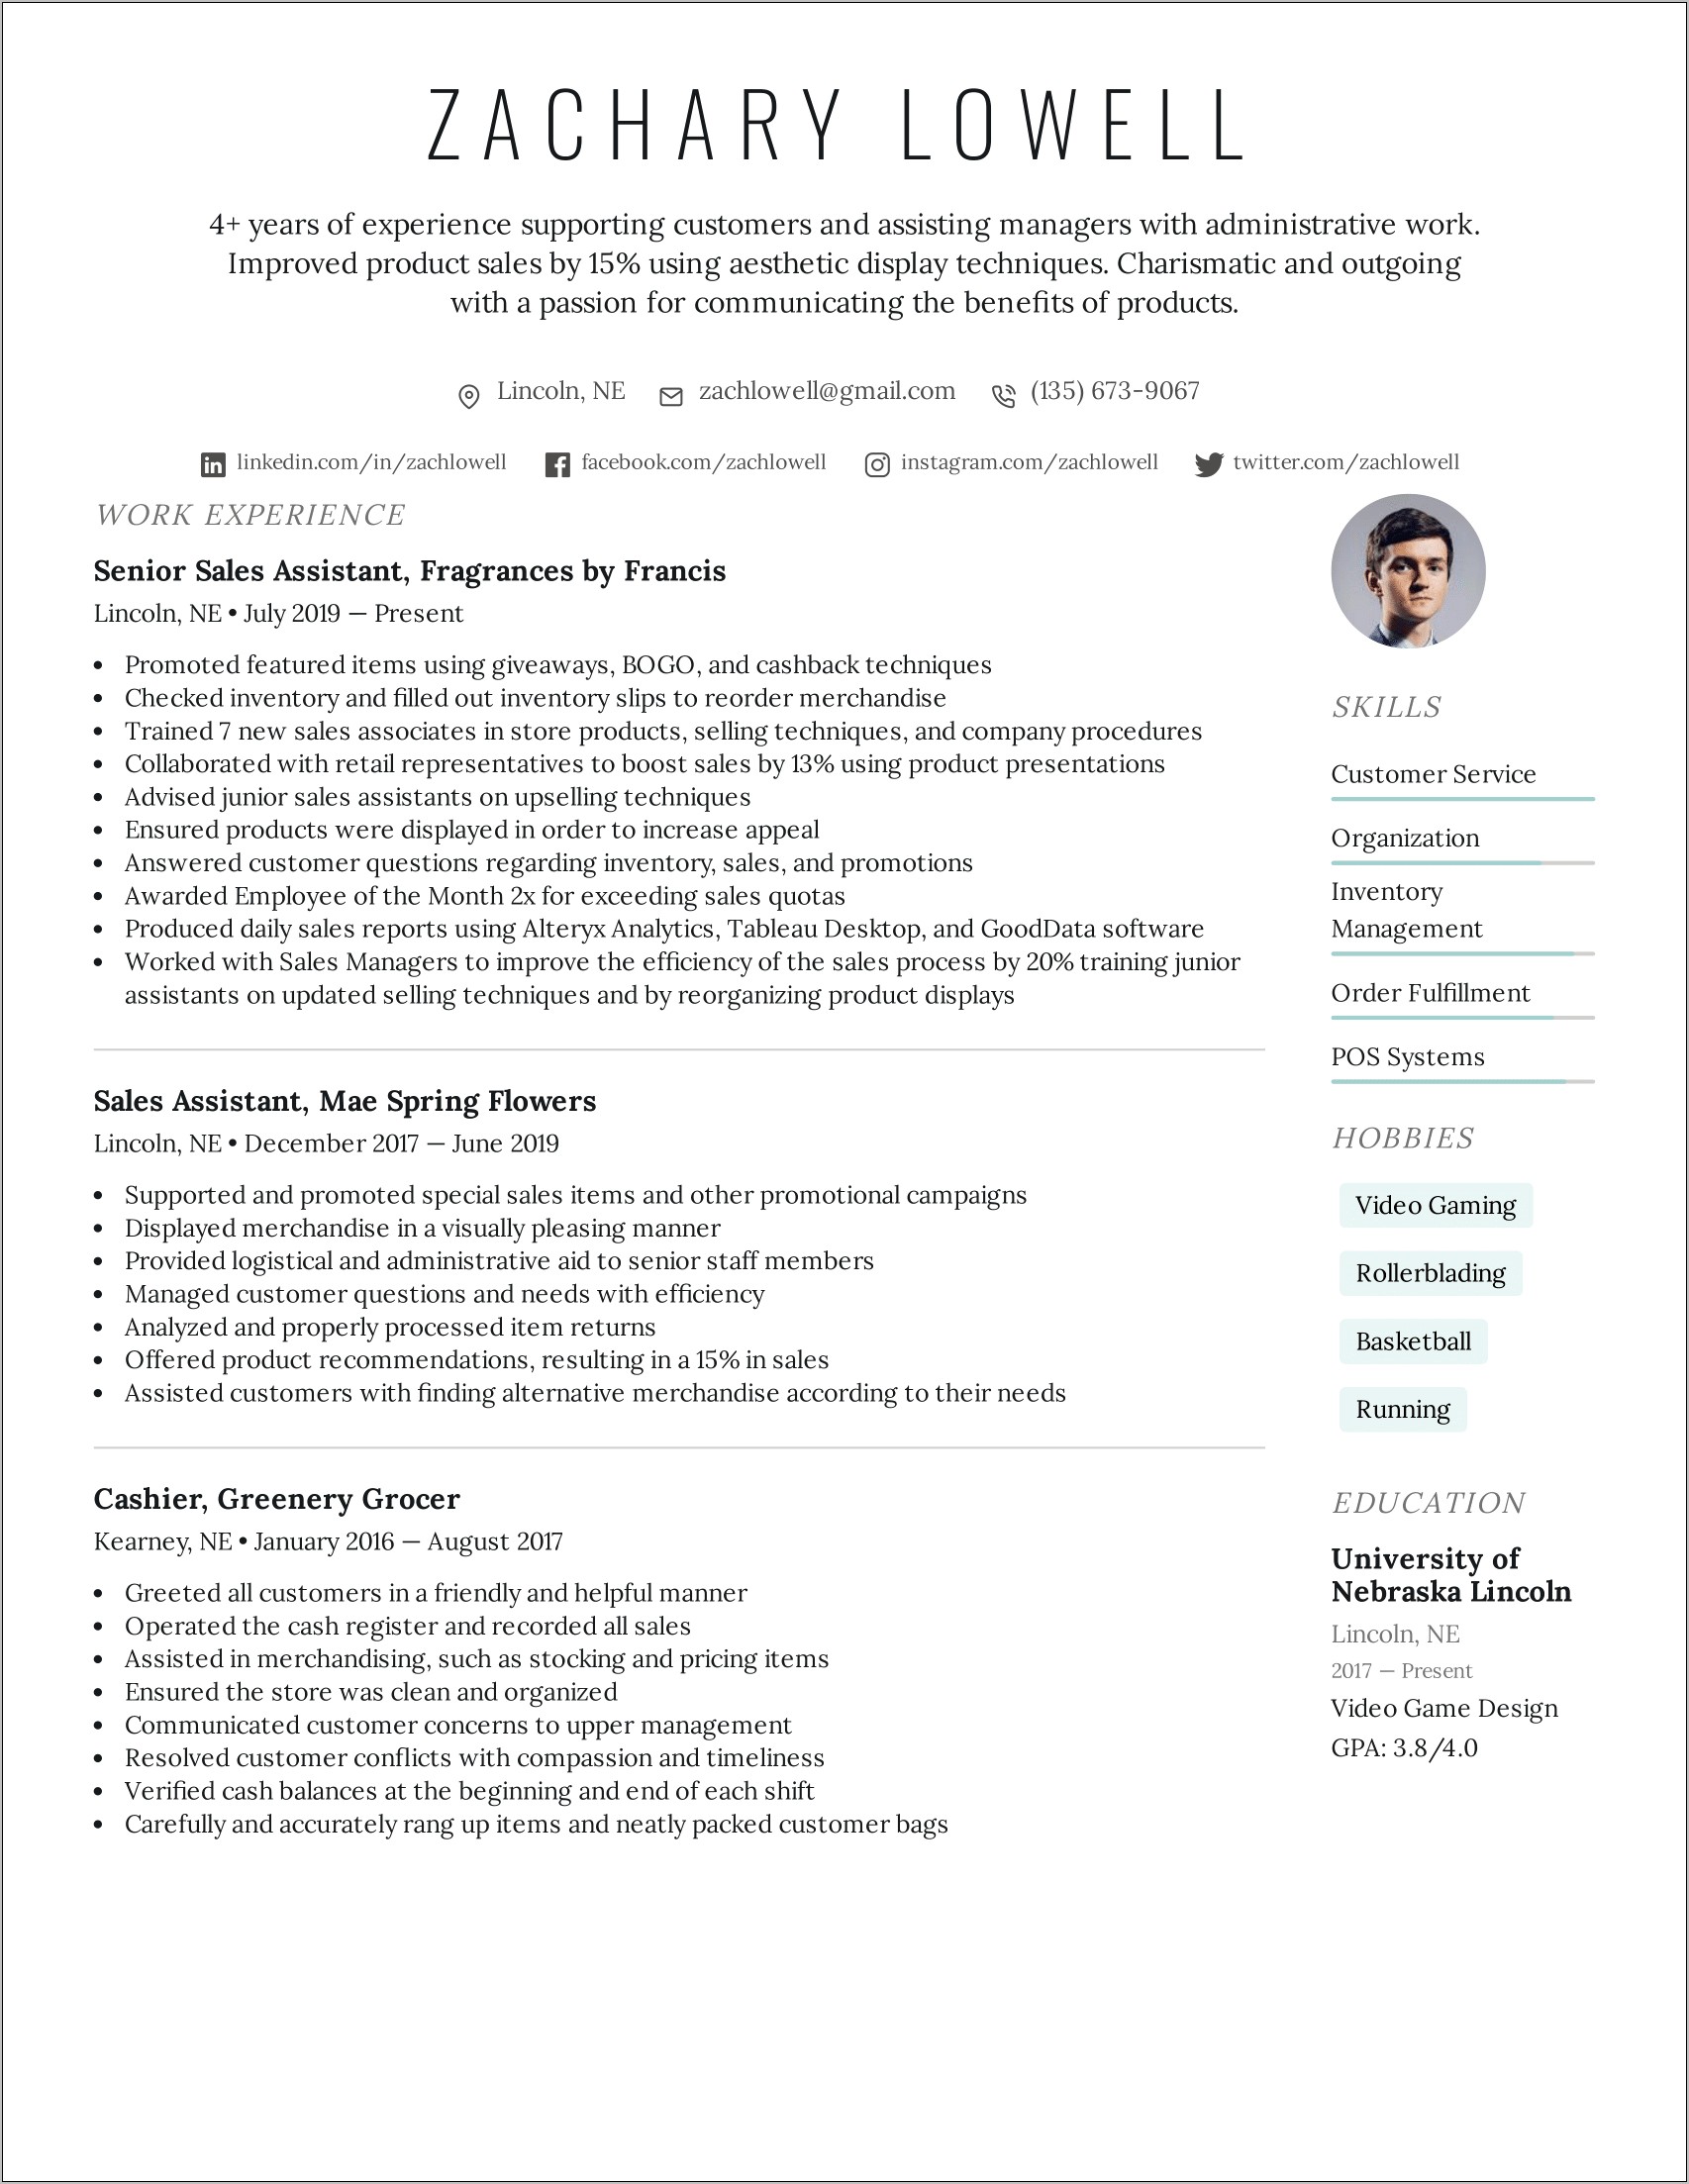 Reapplying To A Job Because Resume Messed Up